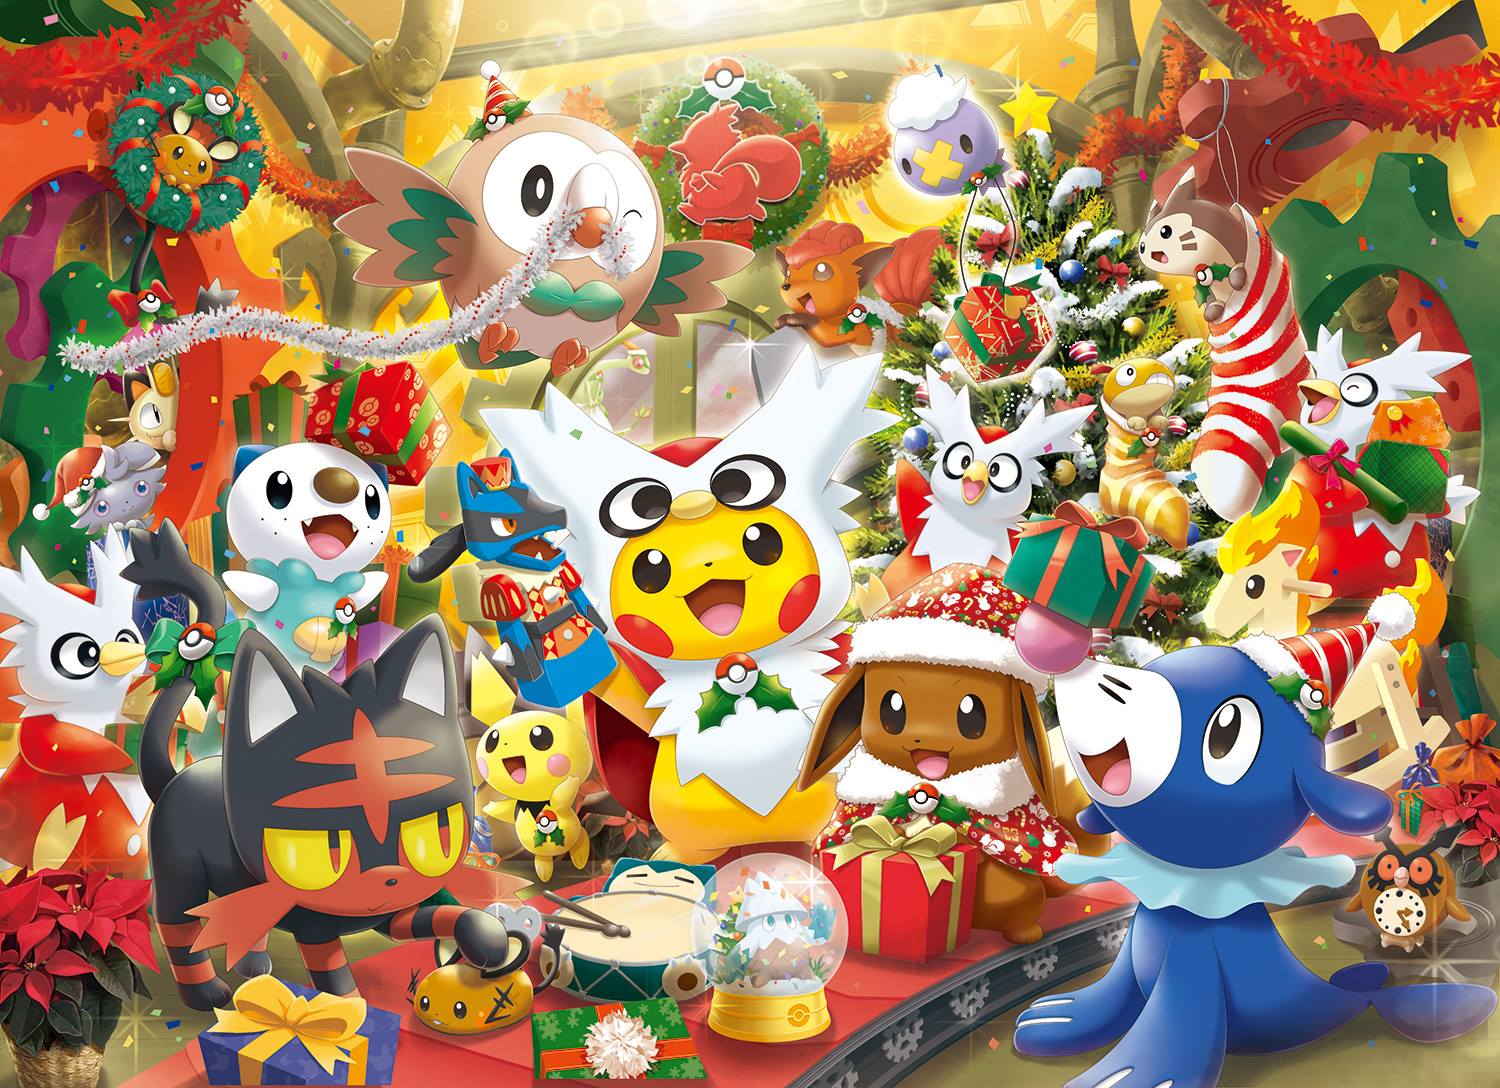 This ridiculously perfect Pokemon Christmas wallpaper image